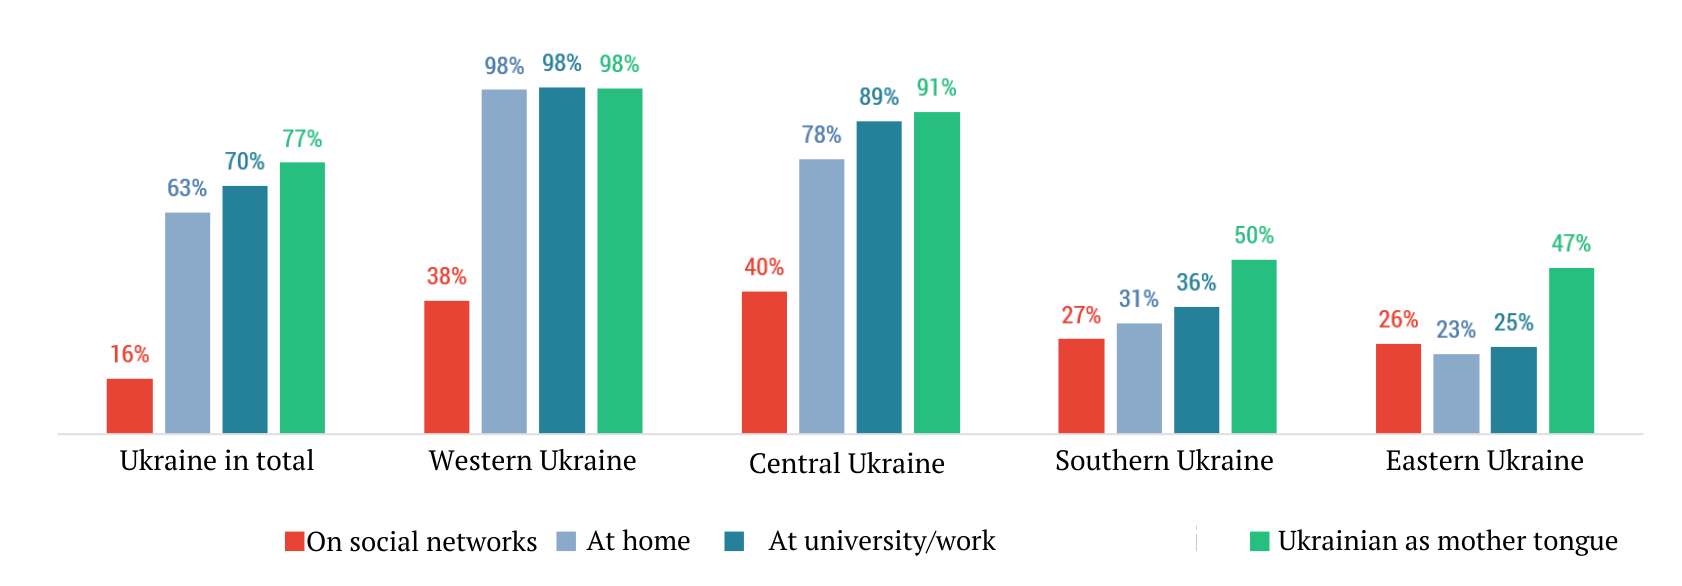 The share of the population by region that uses Ukrainian on social networks; at home; at university or work; and those who consider Ukrainian as their mother tongue. *In total, the share of Ukrainian-language use on social networks is lower than average when analyzed by region, due to the high number of Russian-language users who did not indicate their region. Source: prostirsvobody.org ~